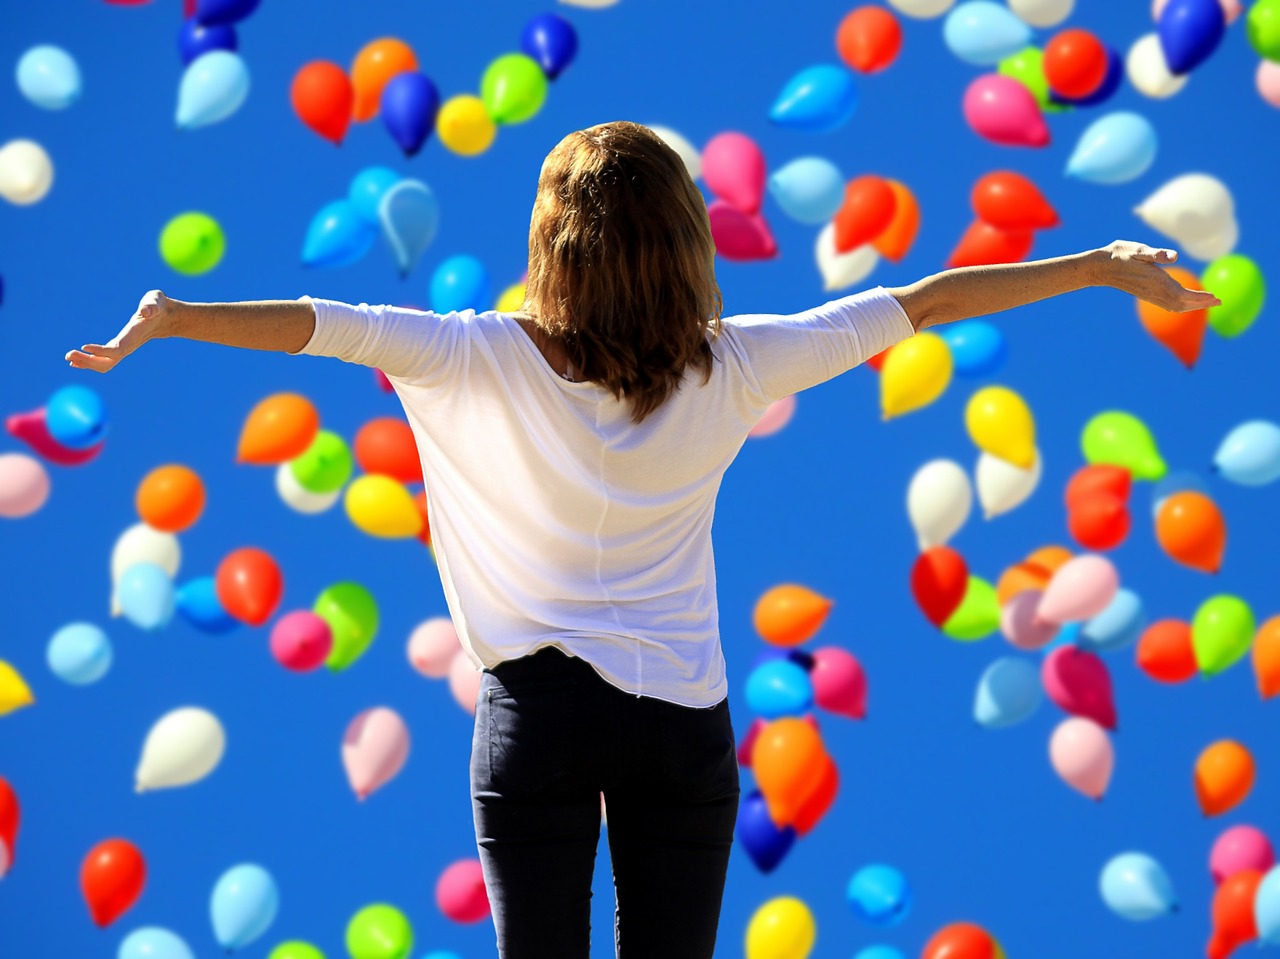 Women Surrounded by Balloons